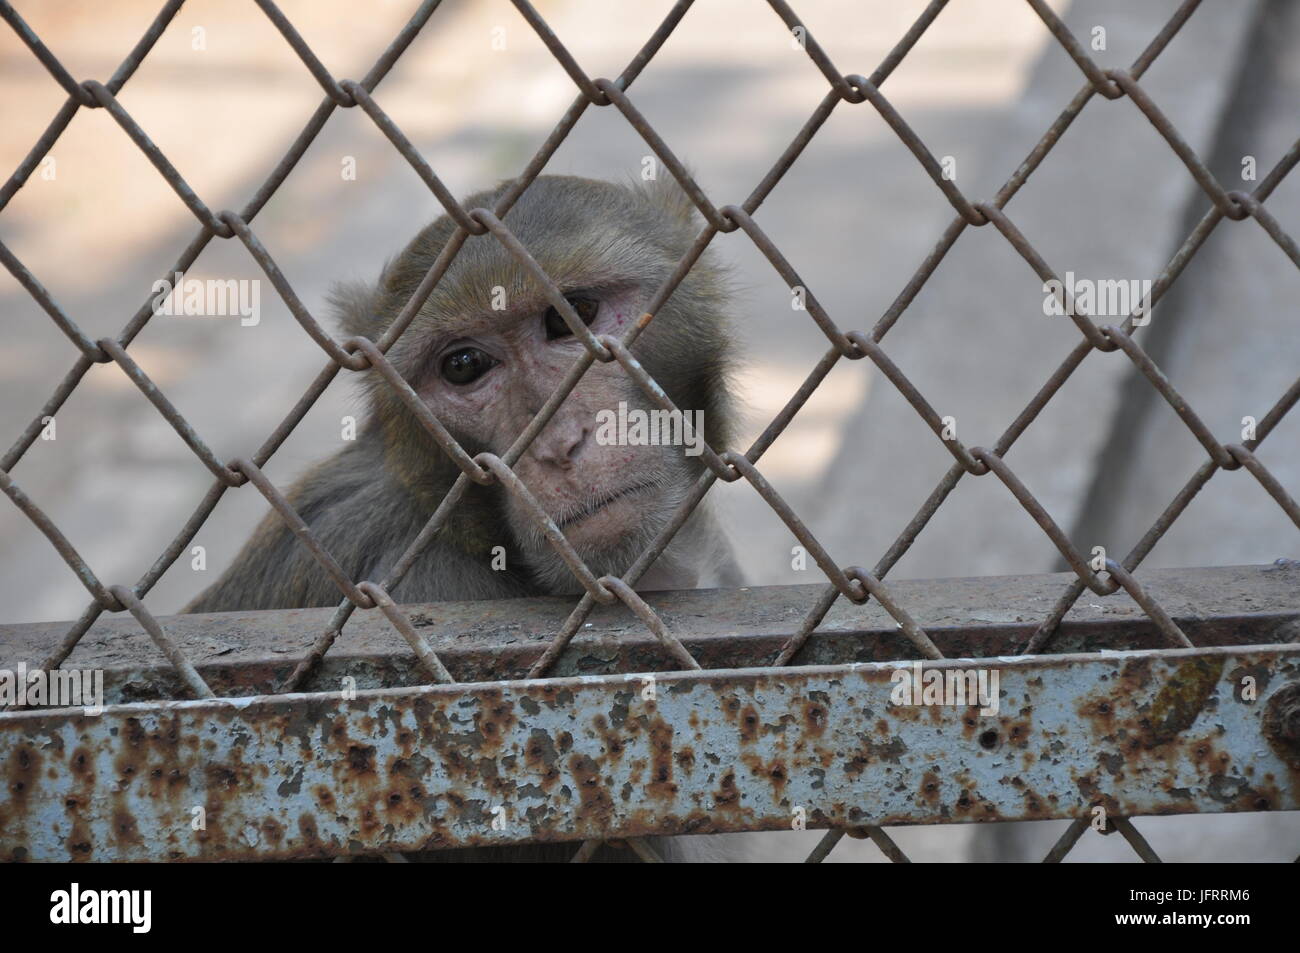 Closeup of monkey in a cage Stock Photo